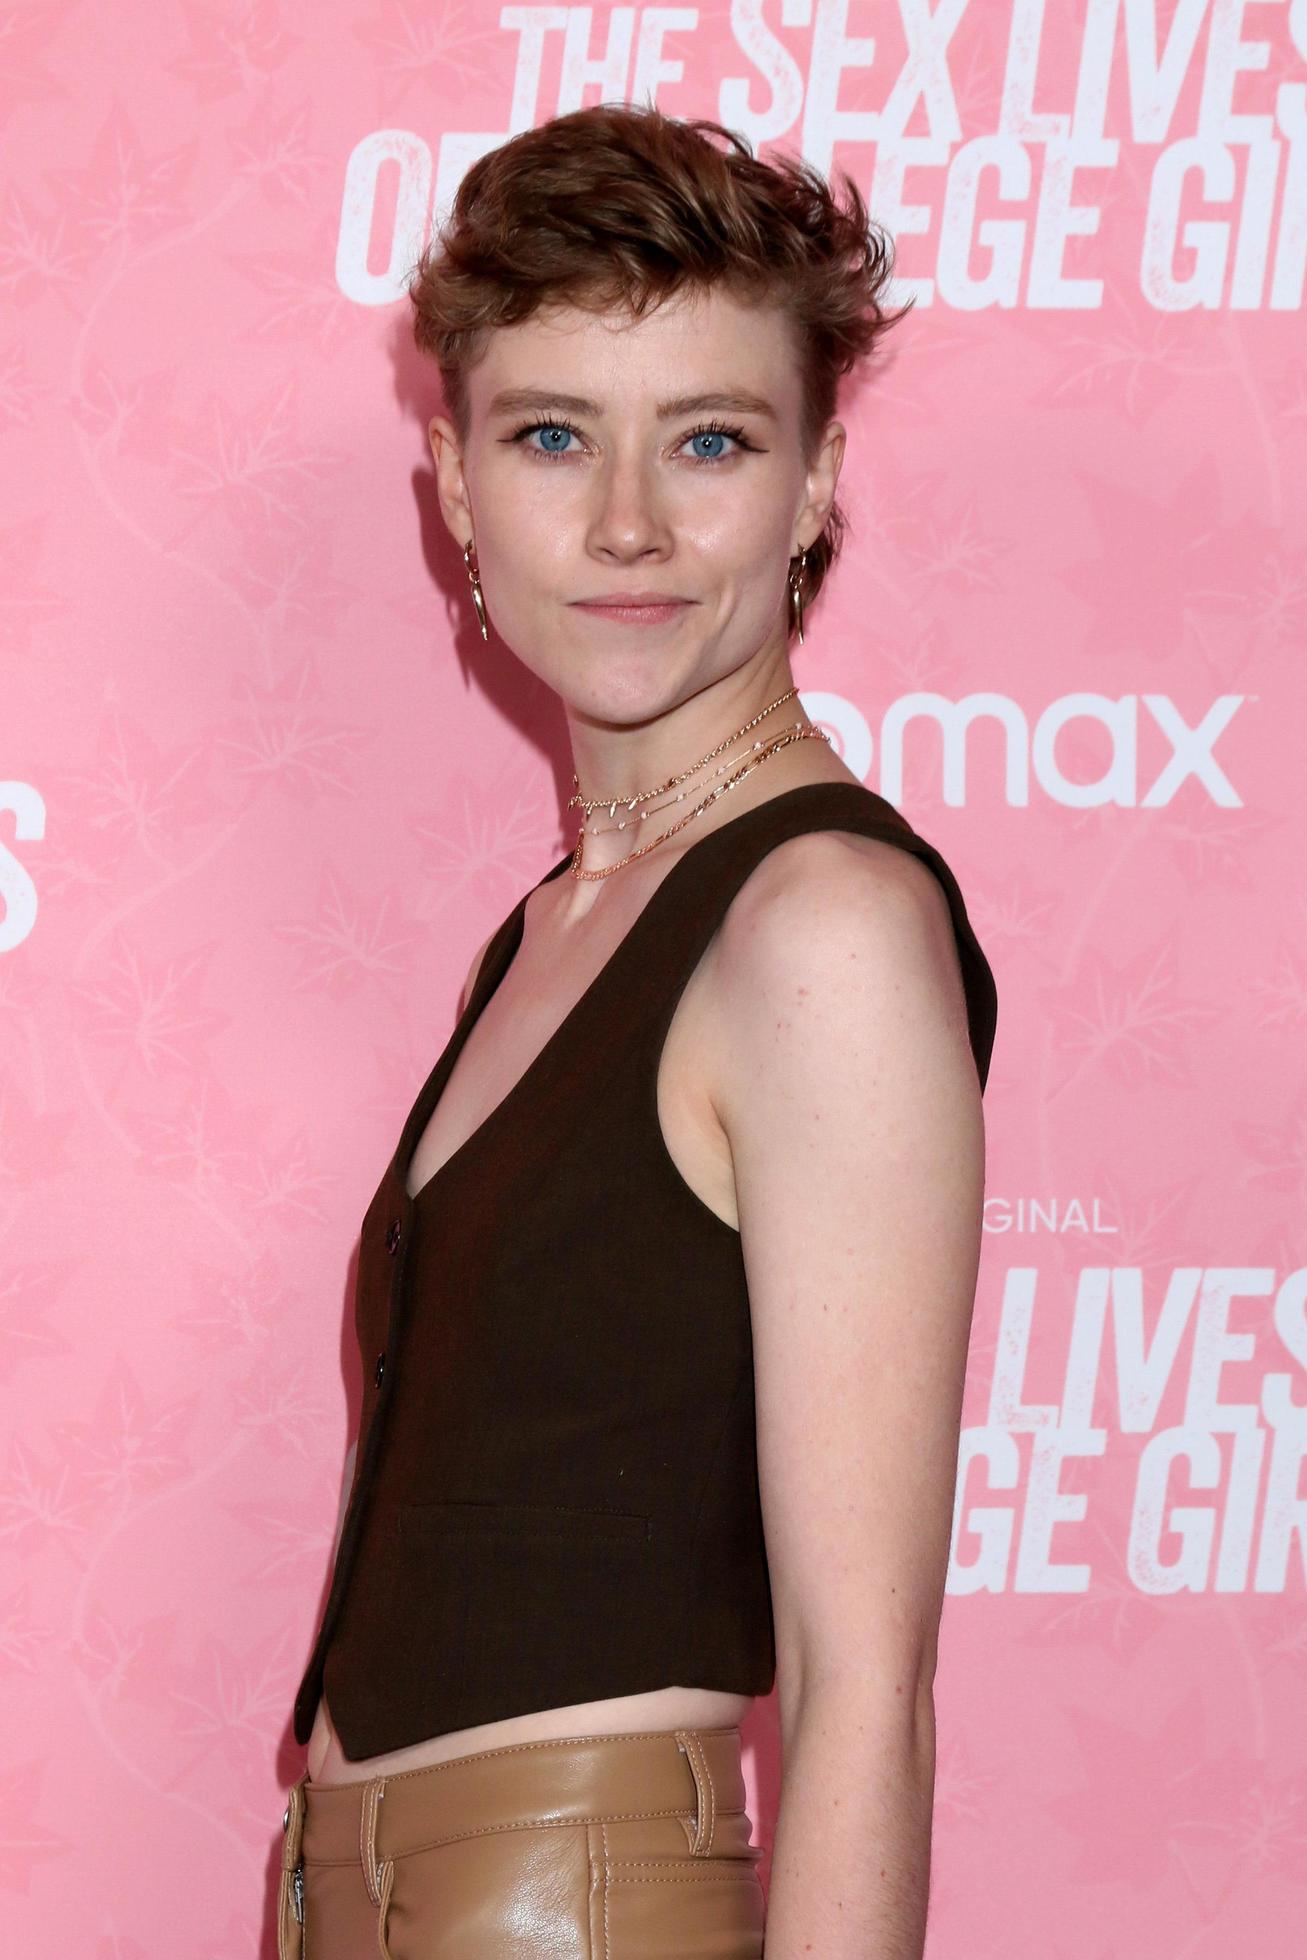 https://static.vecteezy.com/system/resources/previews/008/234/466/large_2x/los-angeles-nov-10-amanda-ripley-at-the-the-sex-lives-of-college-girls-hbo-max-premiere-screening-at-armand-hammer-museum-on-november-10-2021-in-westwood-ca-free-photo.jpg